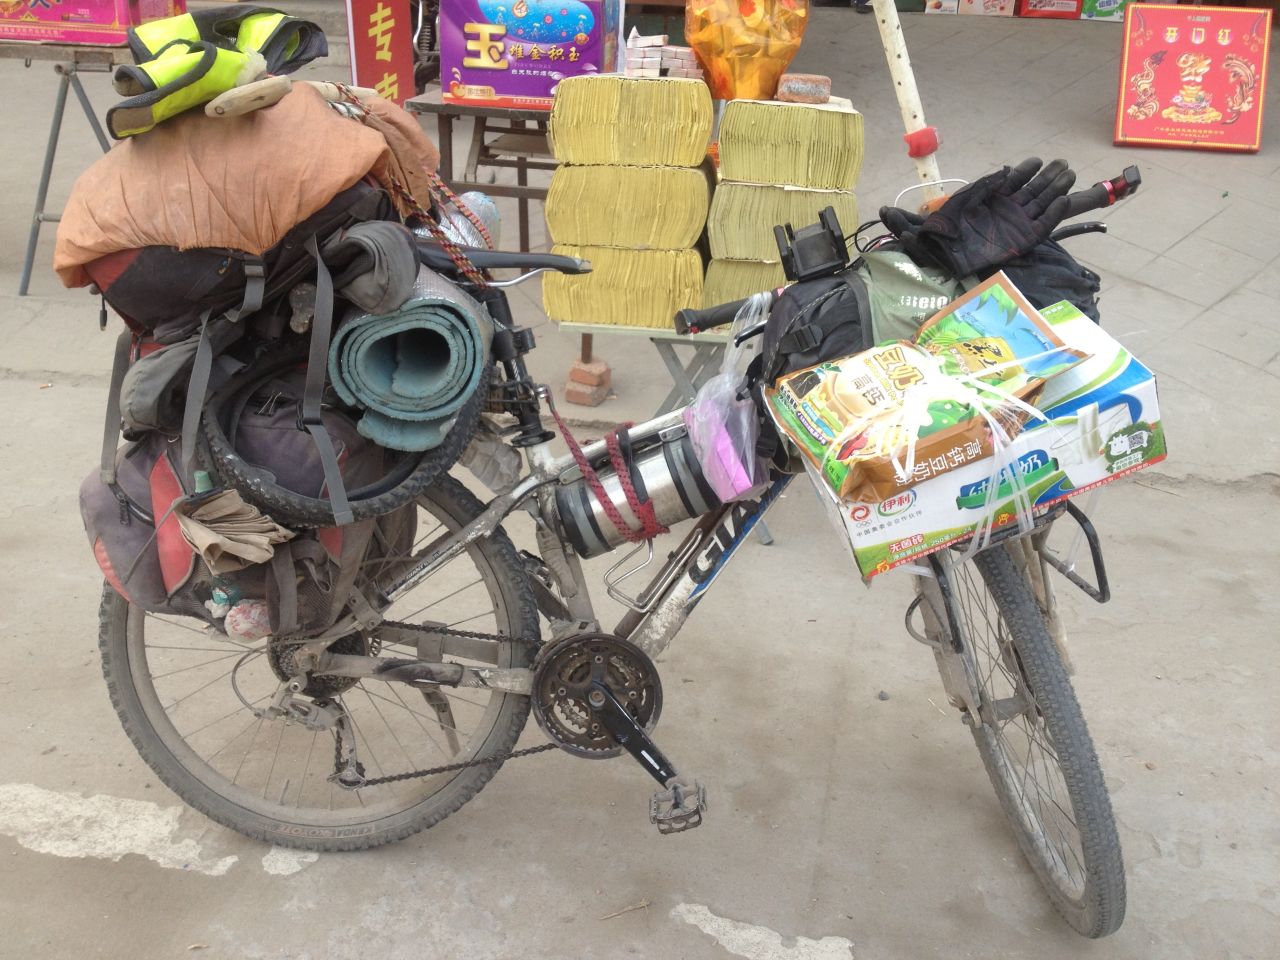 All of the equipment attached to Wang's bike (here in Anhui province in the eastern side of China) was taken along with the machine. Police said there was no damage.